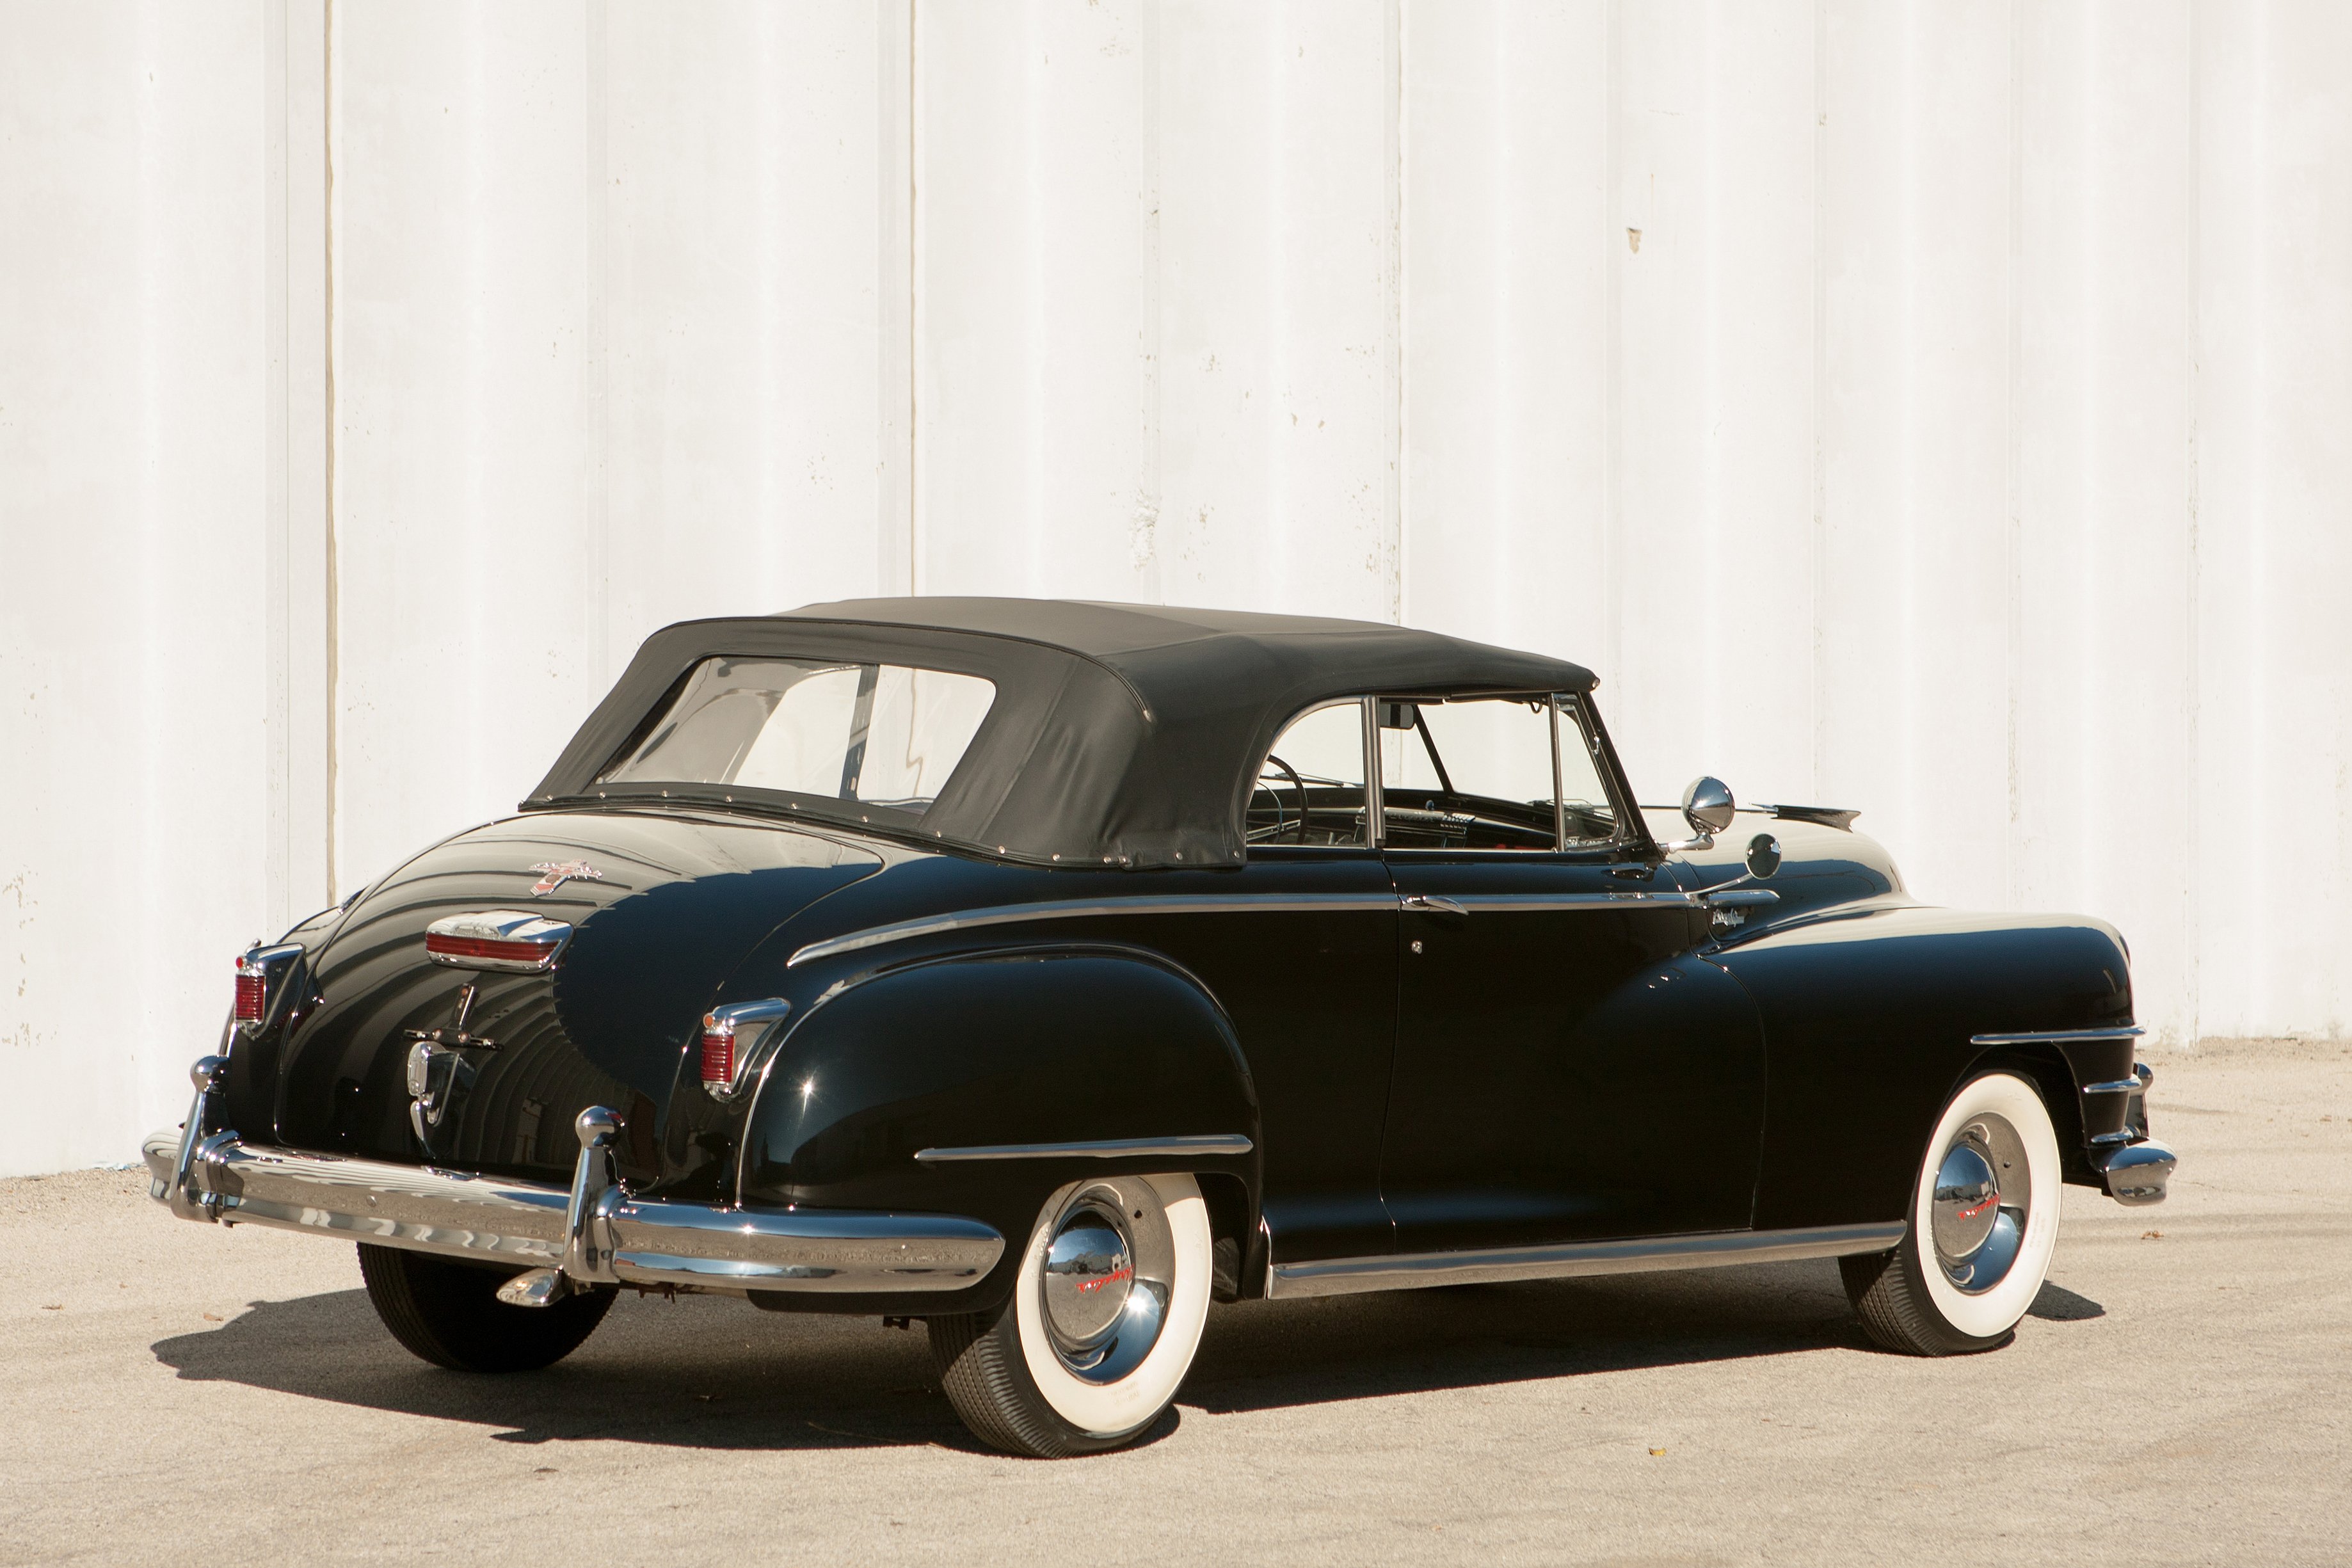 1948, Chrysler, New, Yorker, Convertible, Black, Classic, Old, Vintage, Usa, 3673x2449 02 Wallpaper